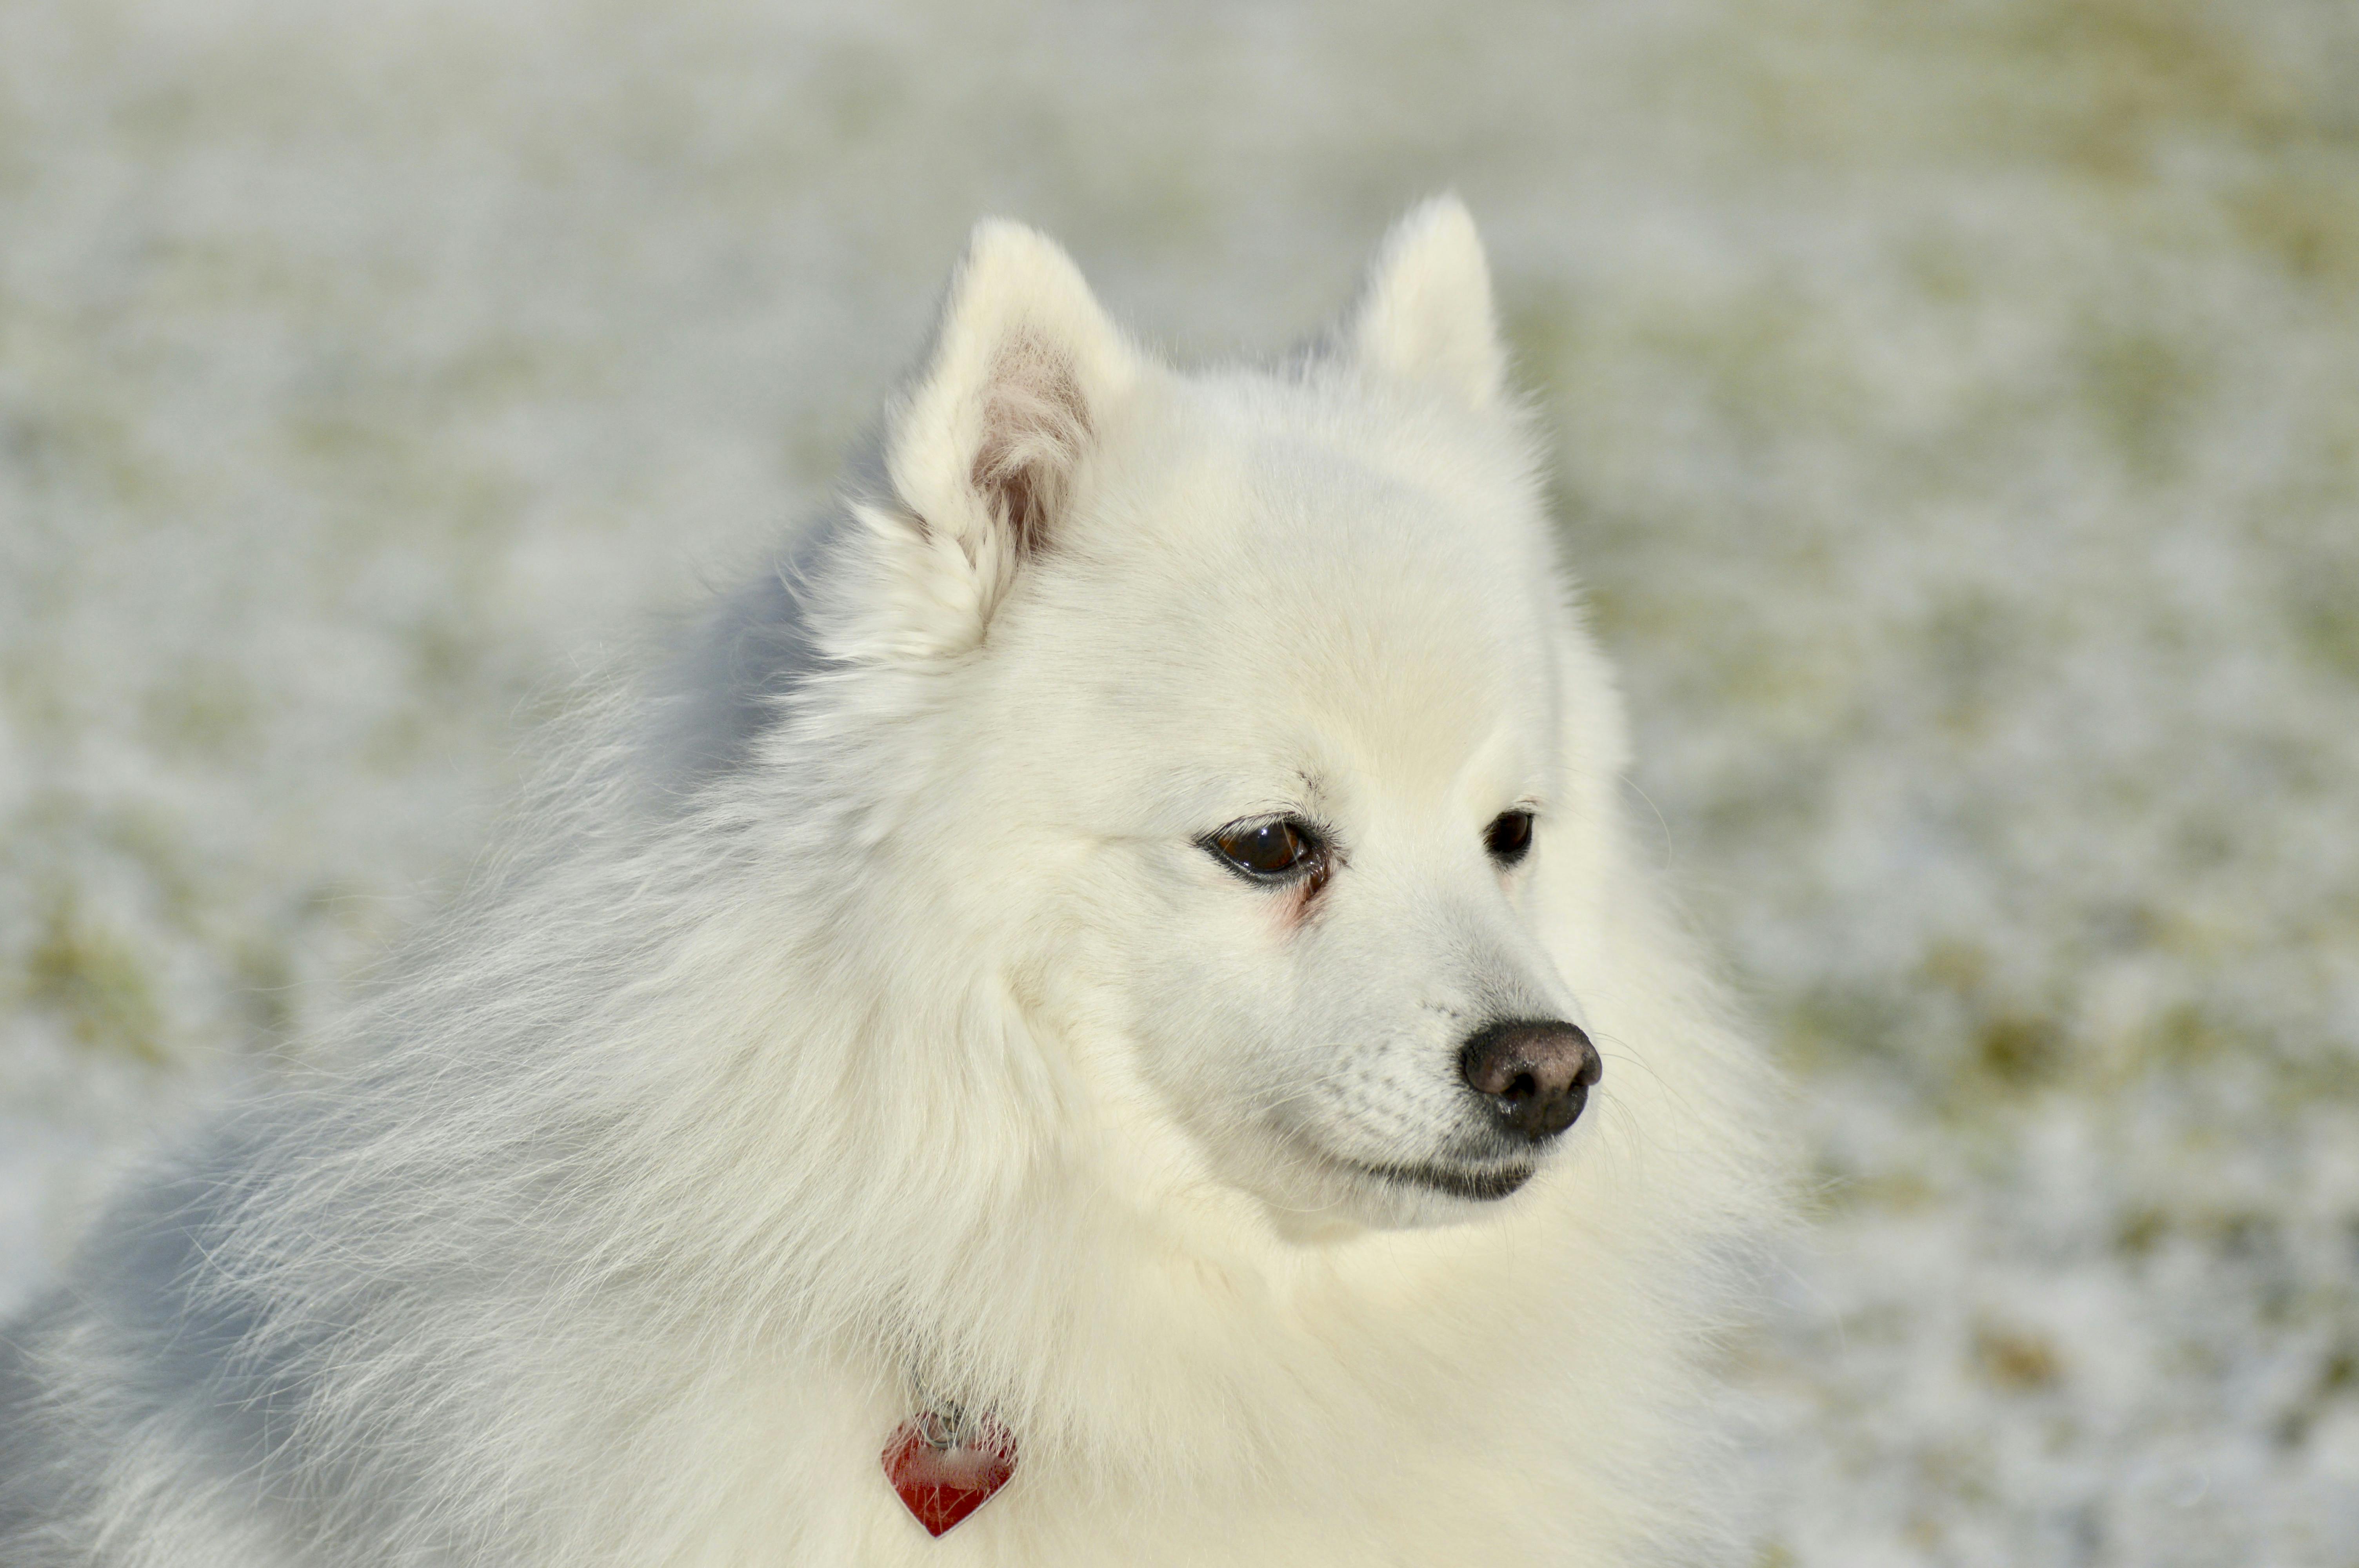 Fluffy white dog in the snow